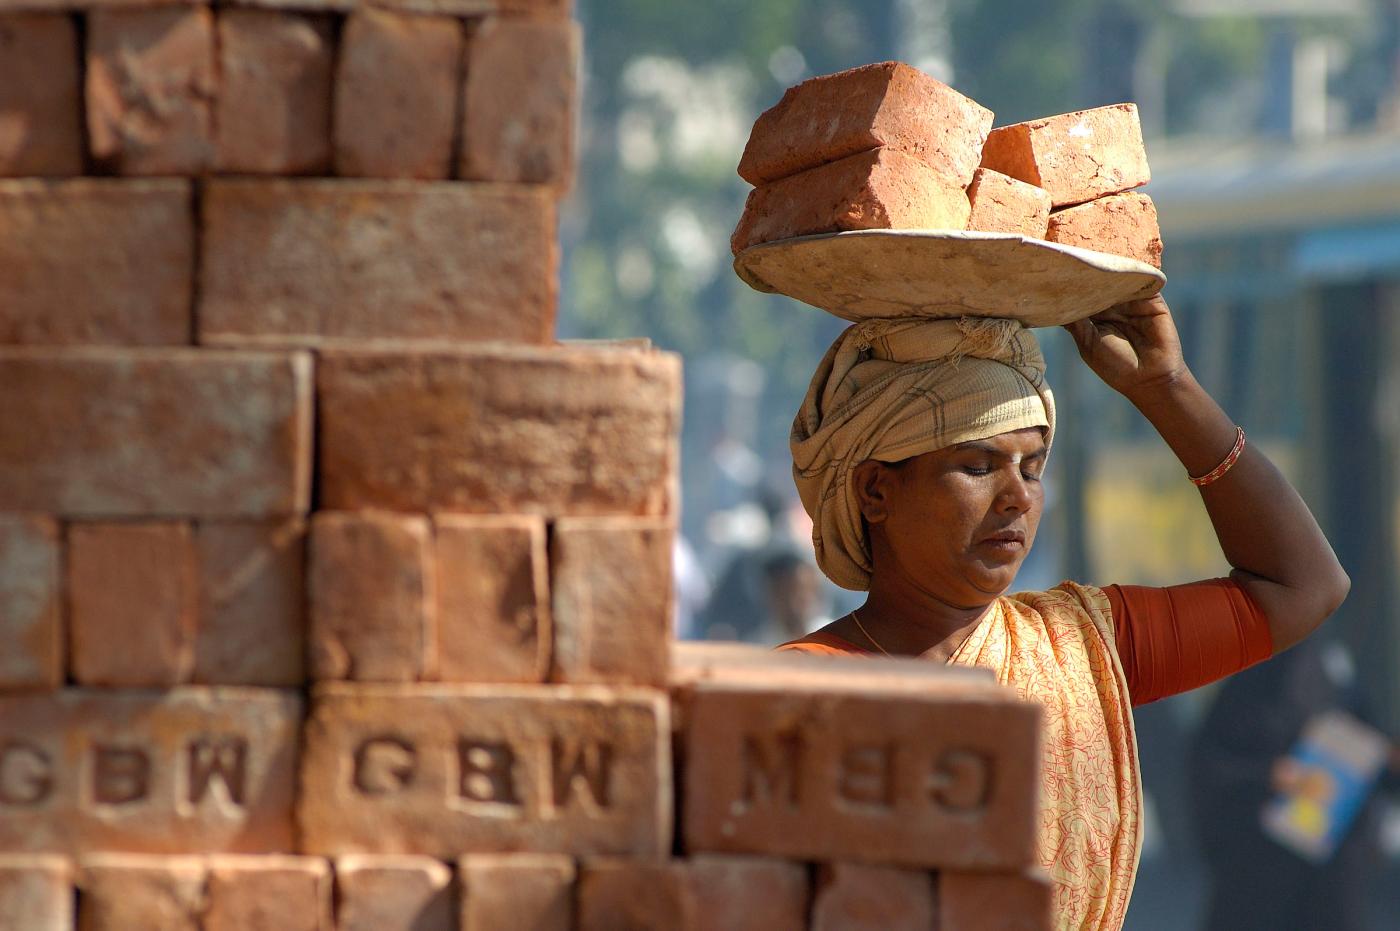 Dalit woman works at construction site